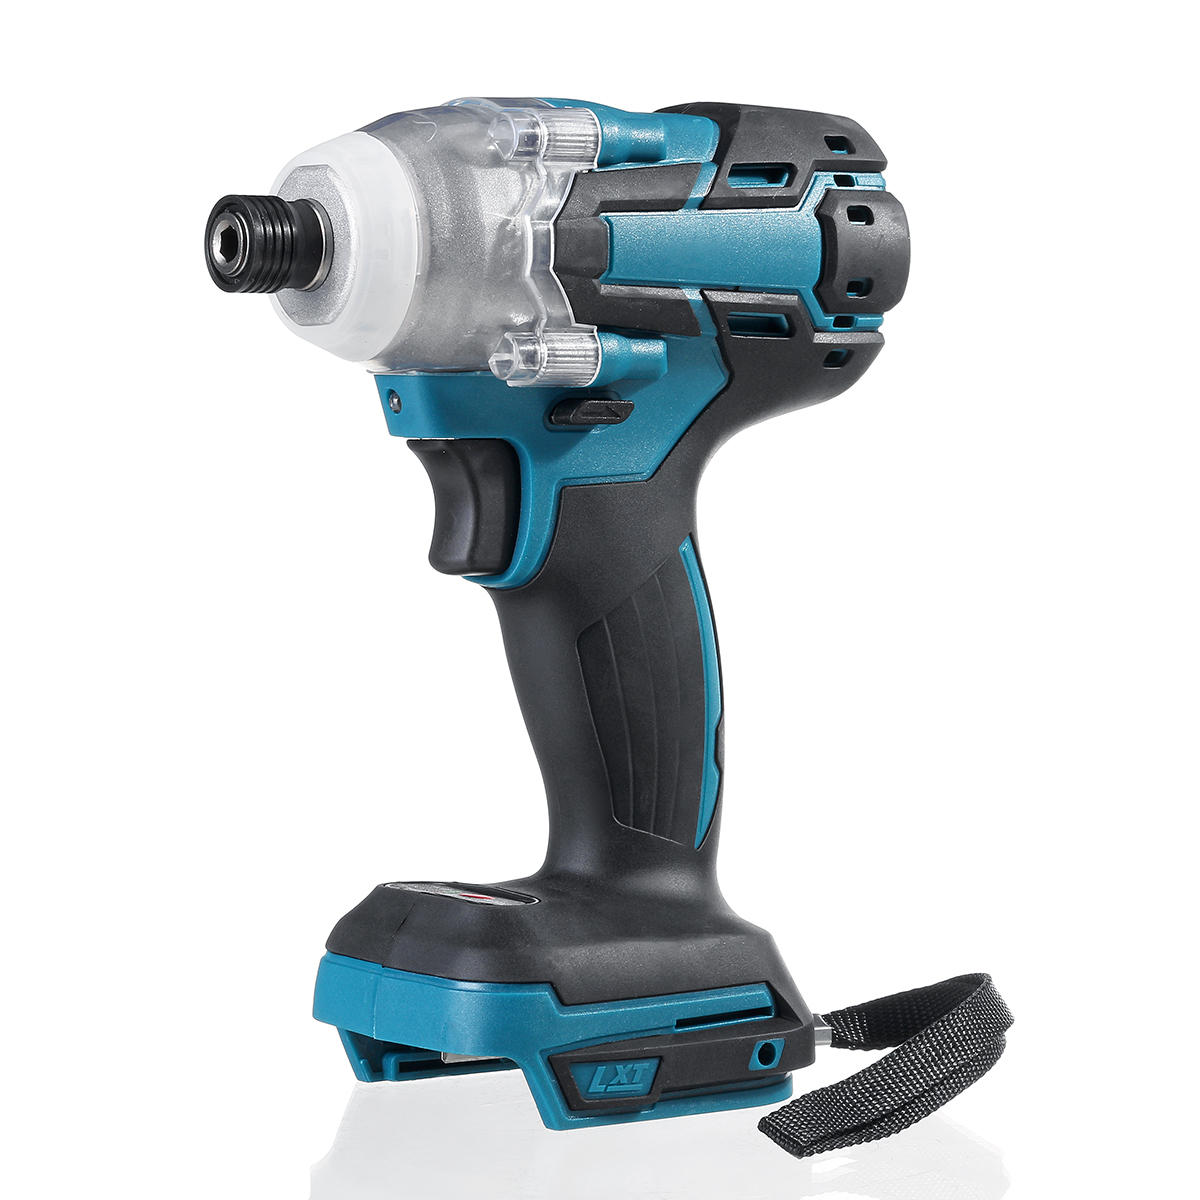 best price,drillpro,18v,520nm,brushless,impact,drill,driver,18v,eu,discount